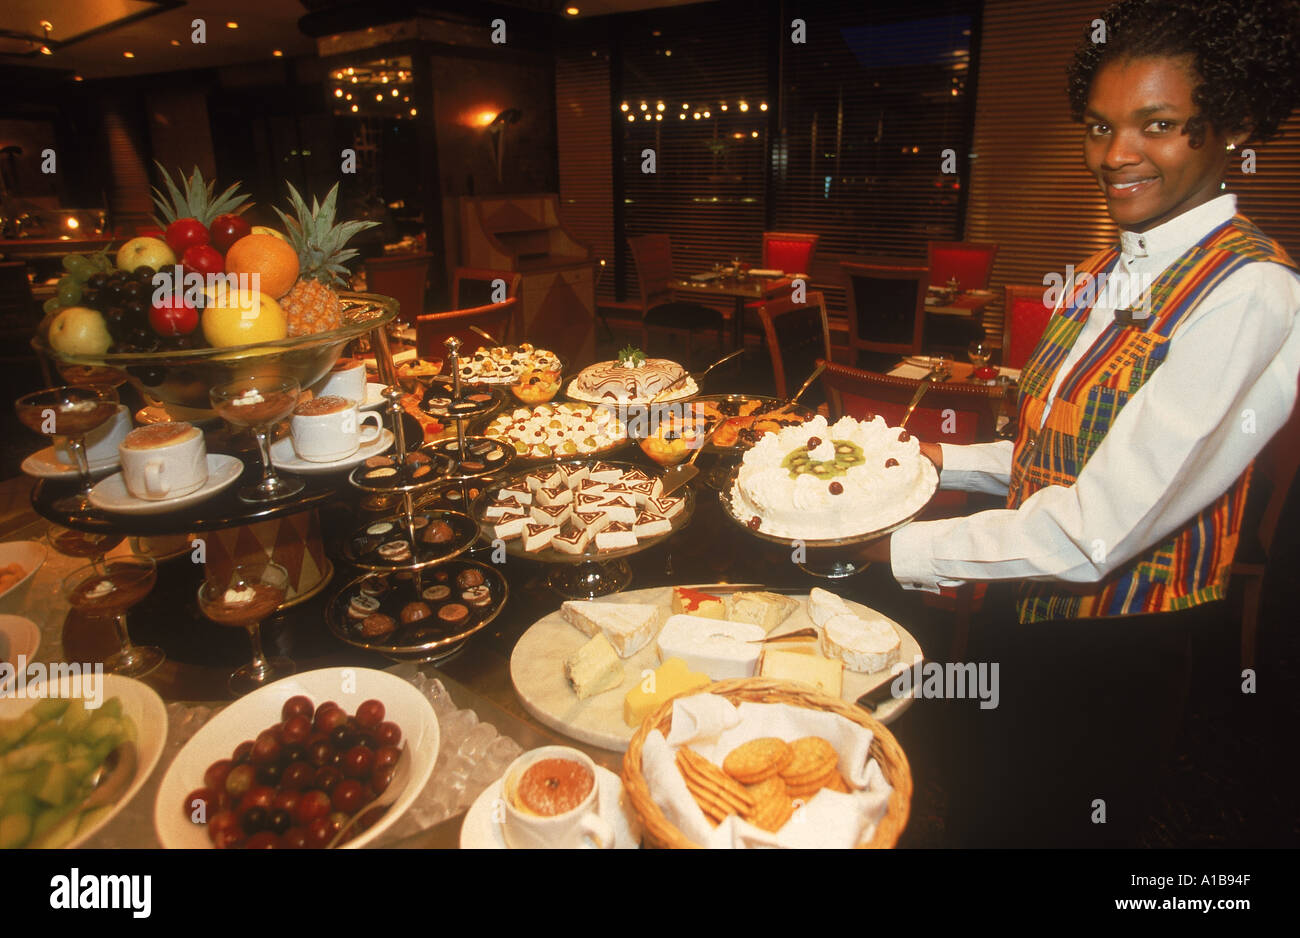 Showing off the evenings spread in Durban South Africa A Evrard Stock Photo